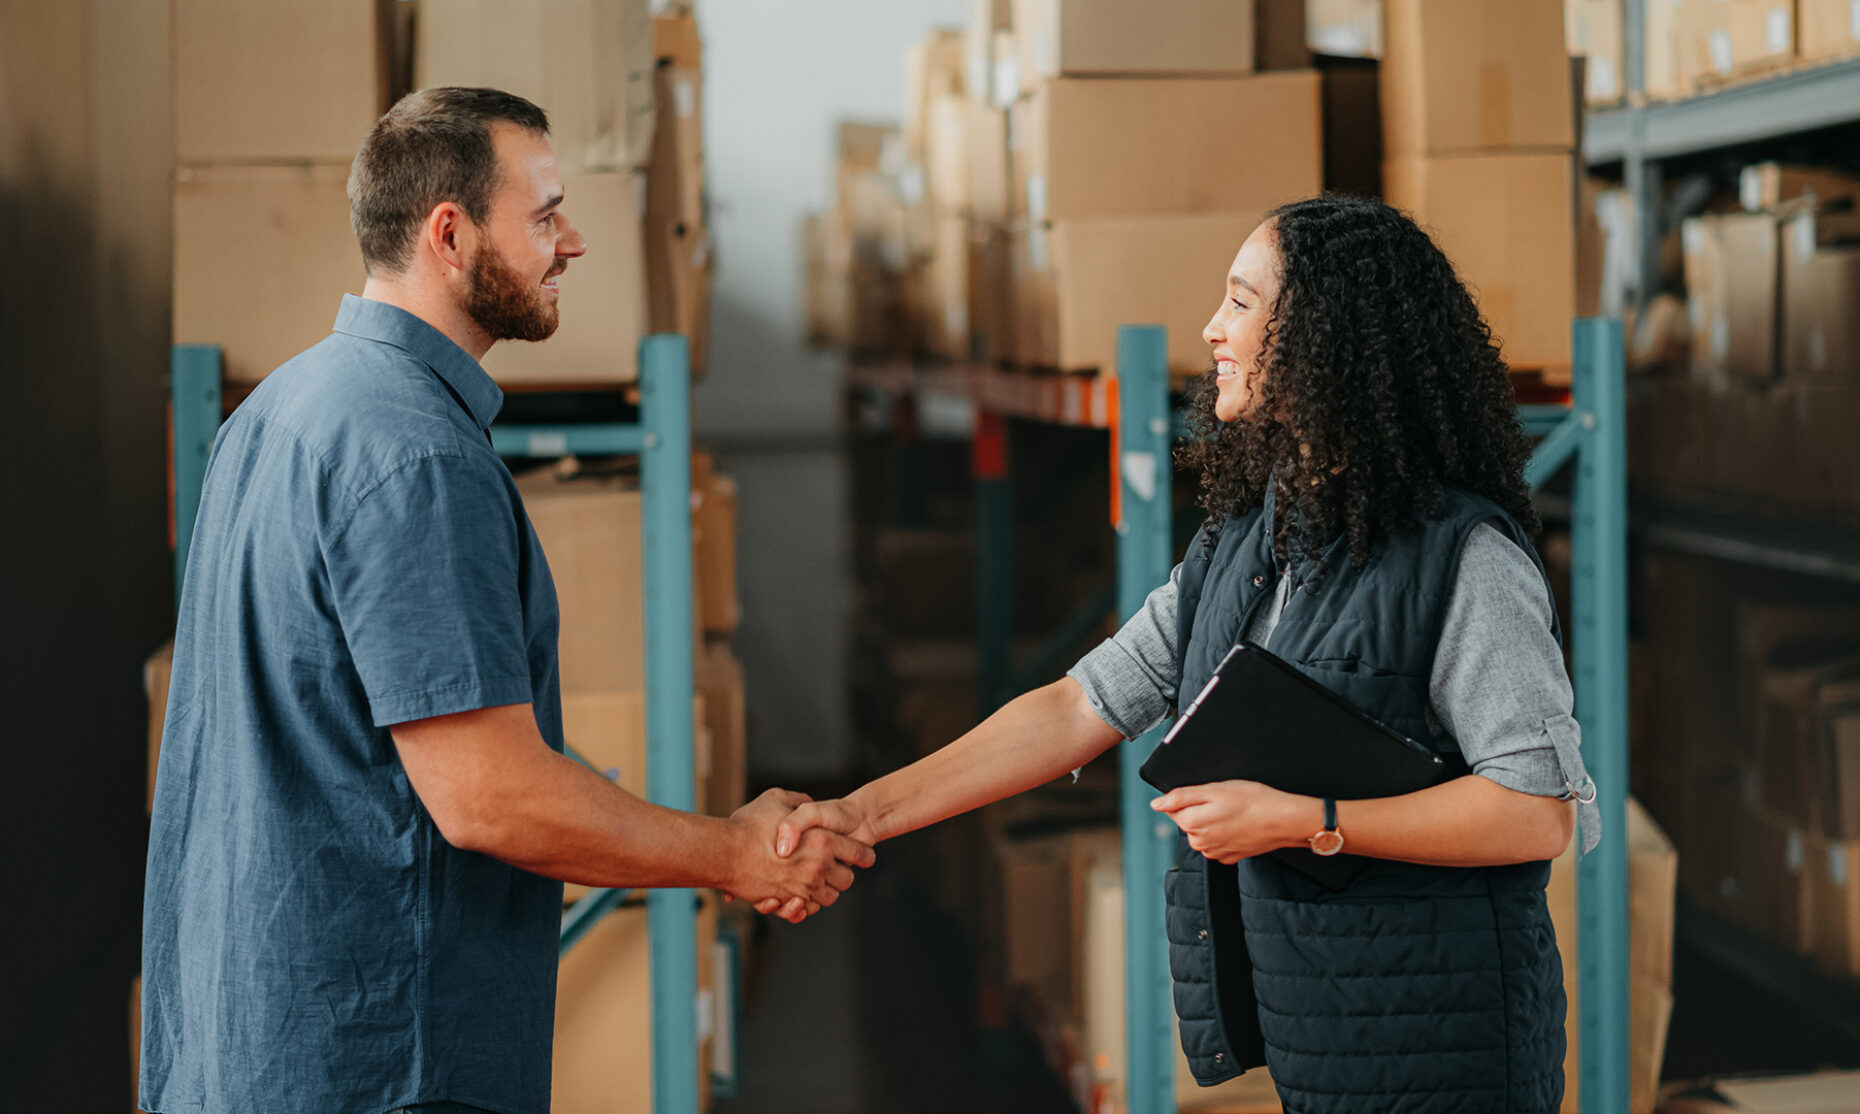 Shipping, supply chain and delivery partner with handshake for partnership, support and thank you in a warehouse. Box logistics or stock factory employee with teamwork, collaboration business meeting